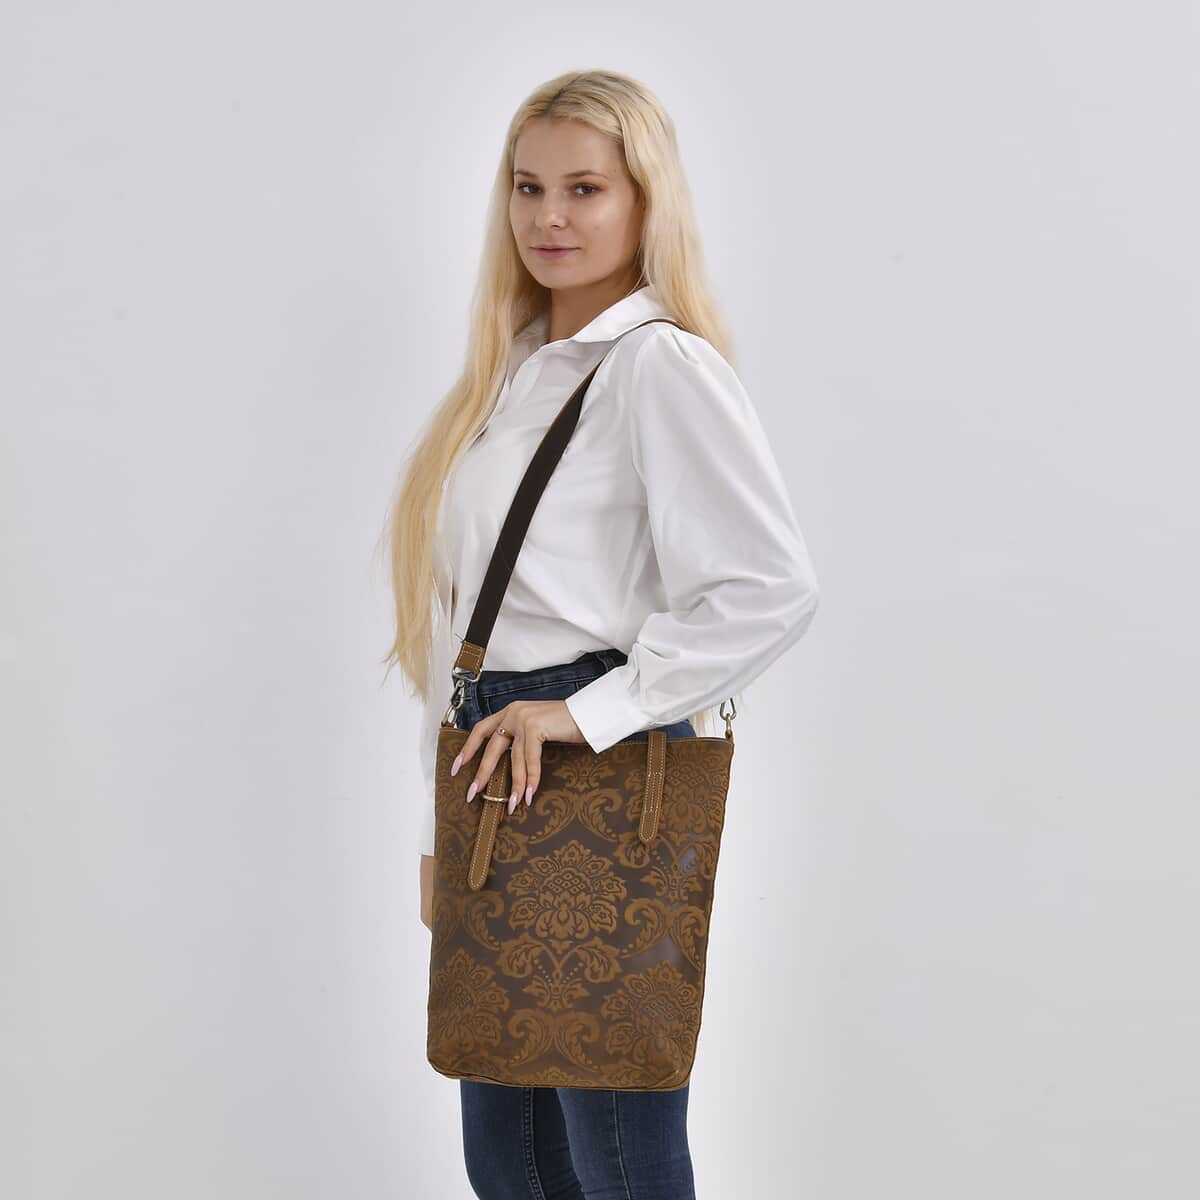 Khaki Genuine Leather Crossbody Bag (10"x3"x14") with 47 Inch Shoulder Strap image number 1